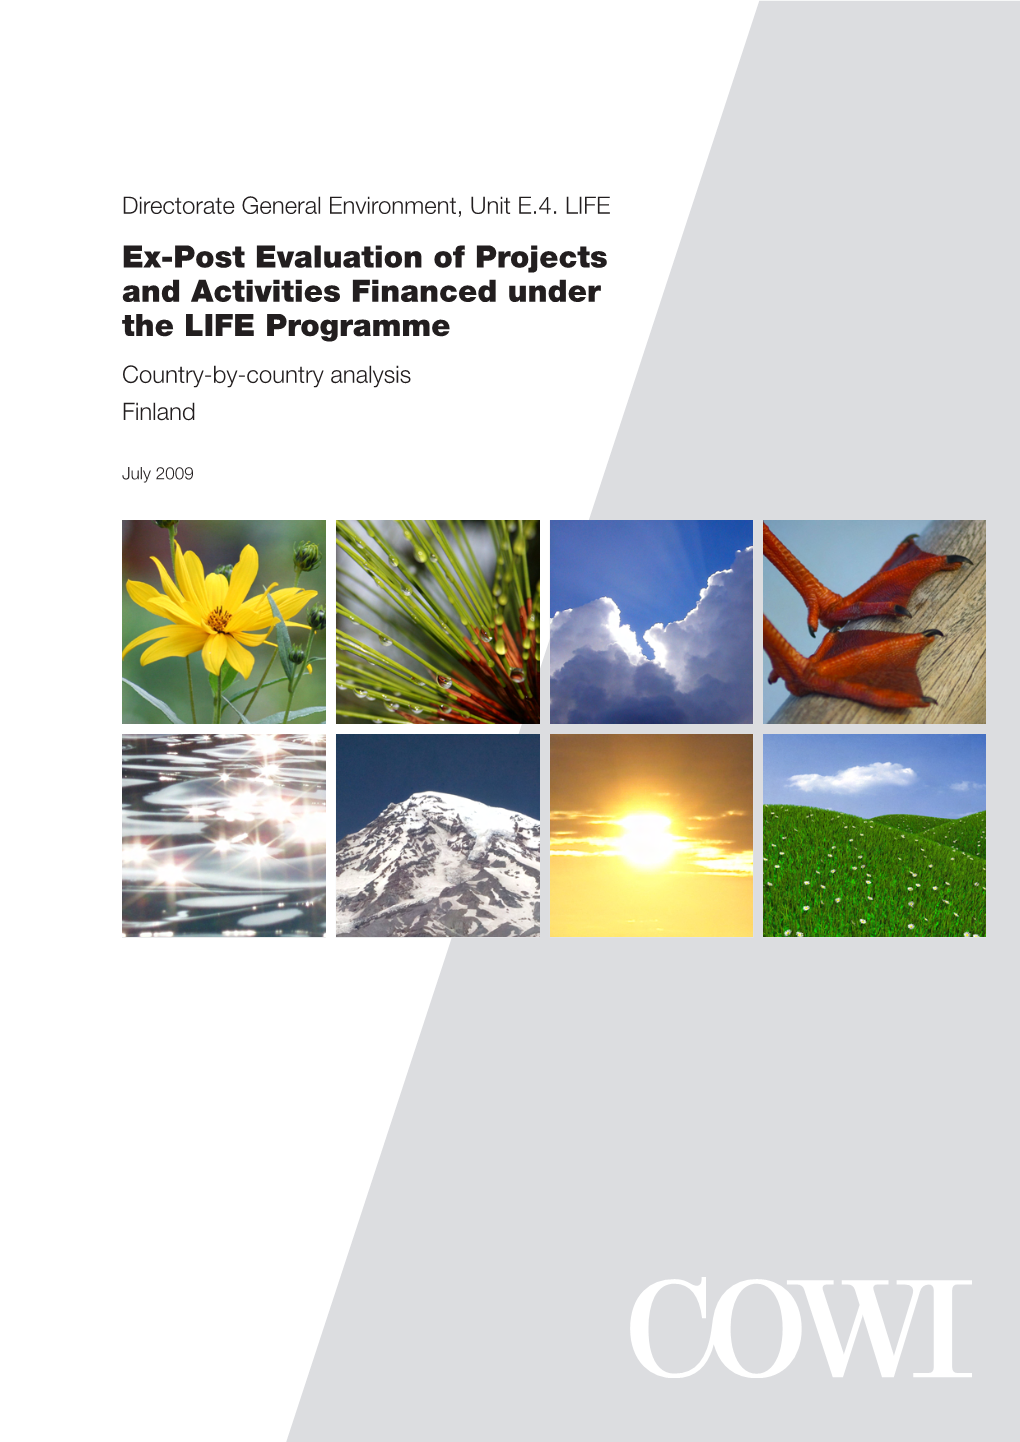 Ex-Post Evaluation of Projects and Activities Financed Under the LIFE Programme Country-By-Country Analysis Finland